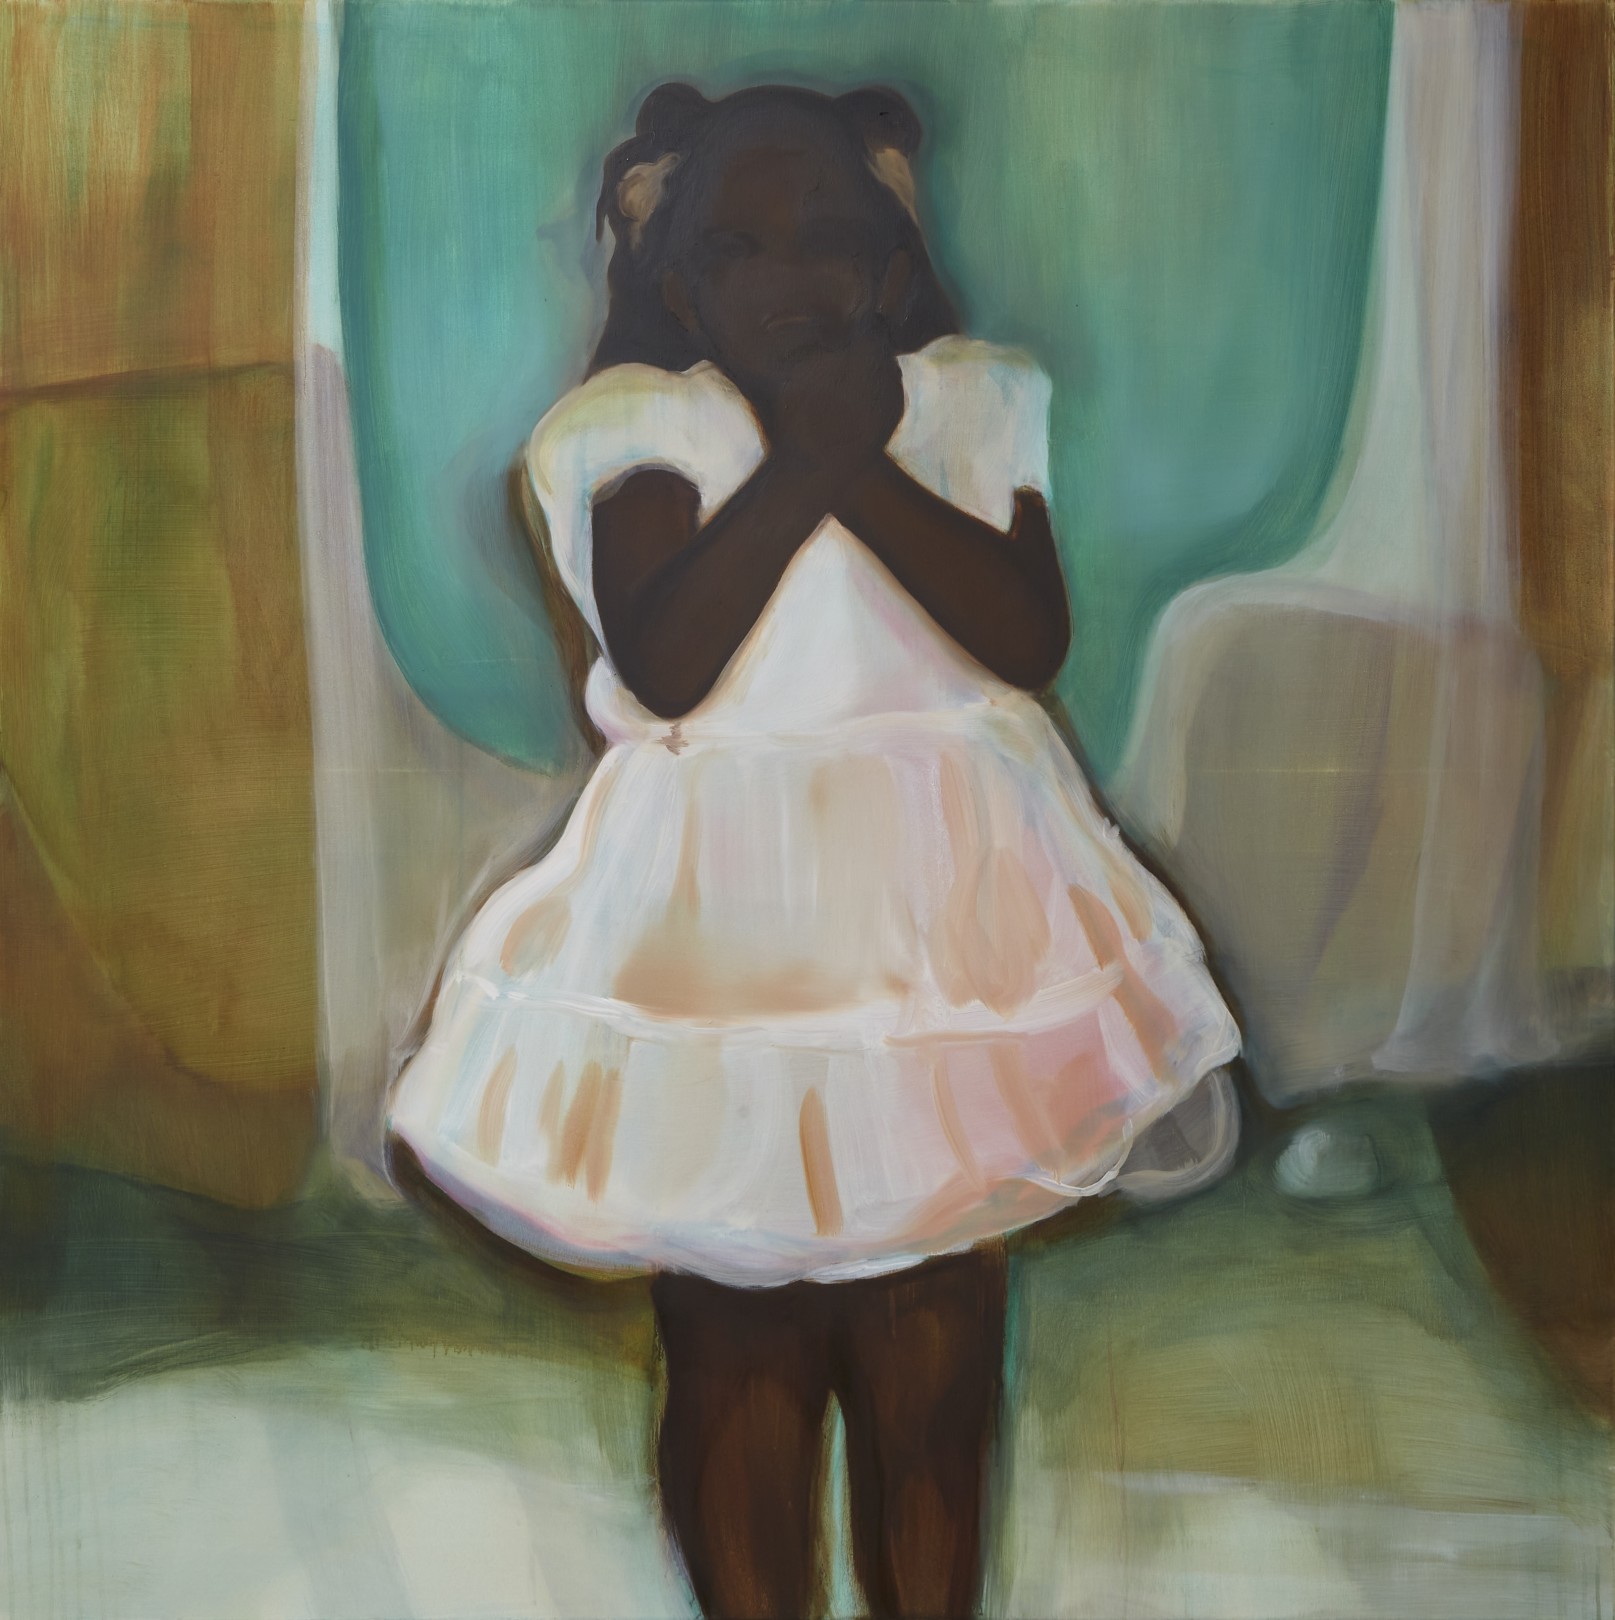 Mississippi Miss, 2021 Oil on canvas 120 x 120 cm. / 47 x 47 in.